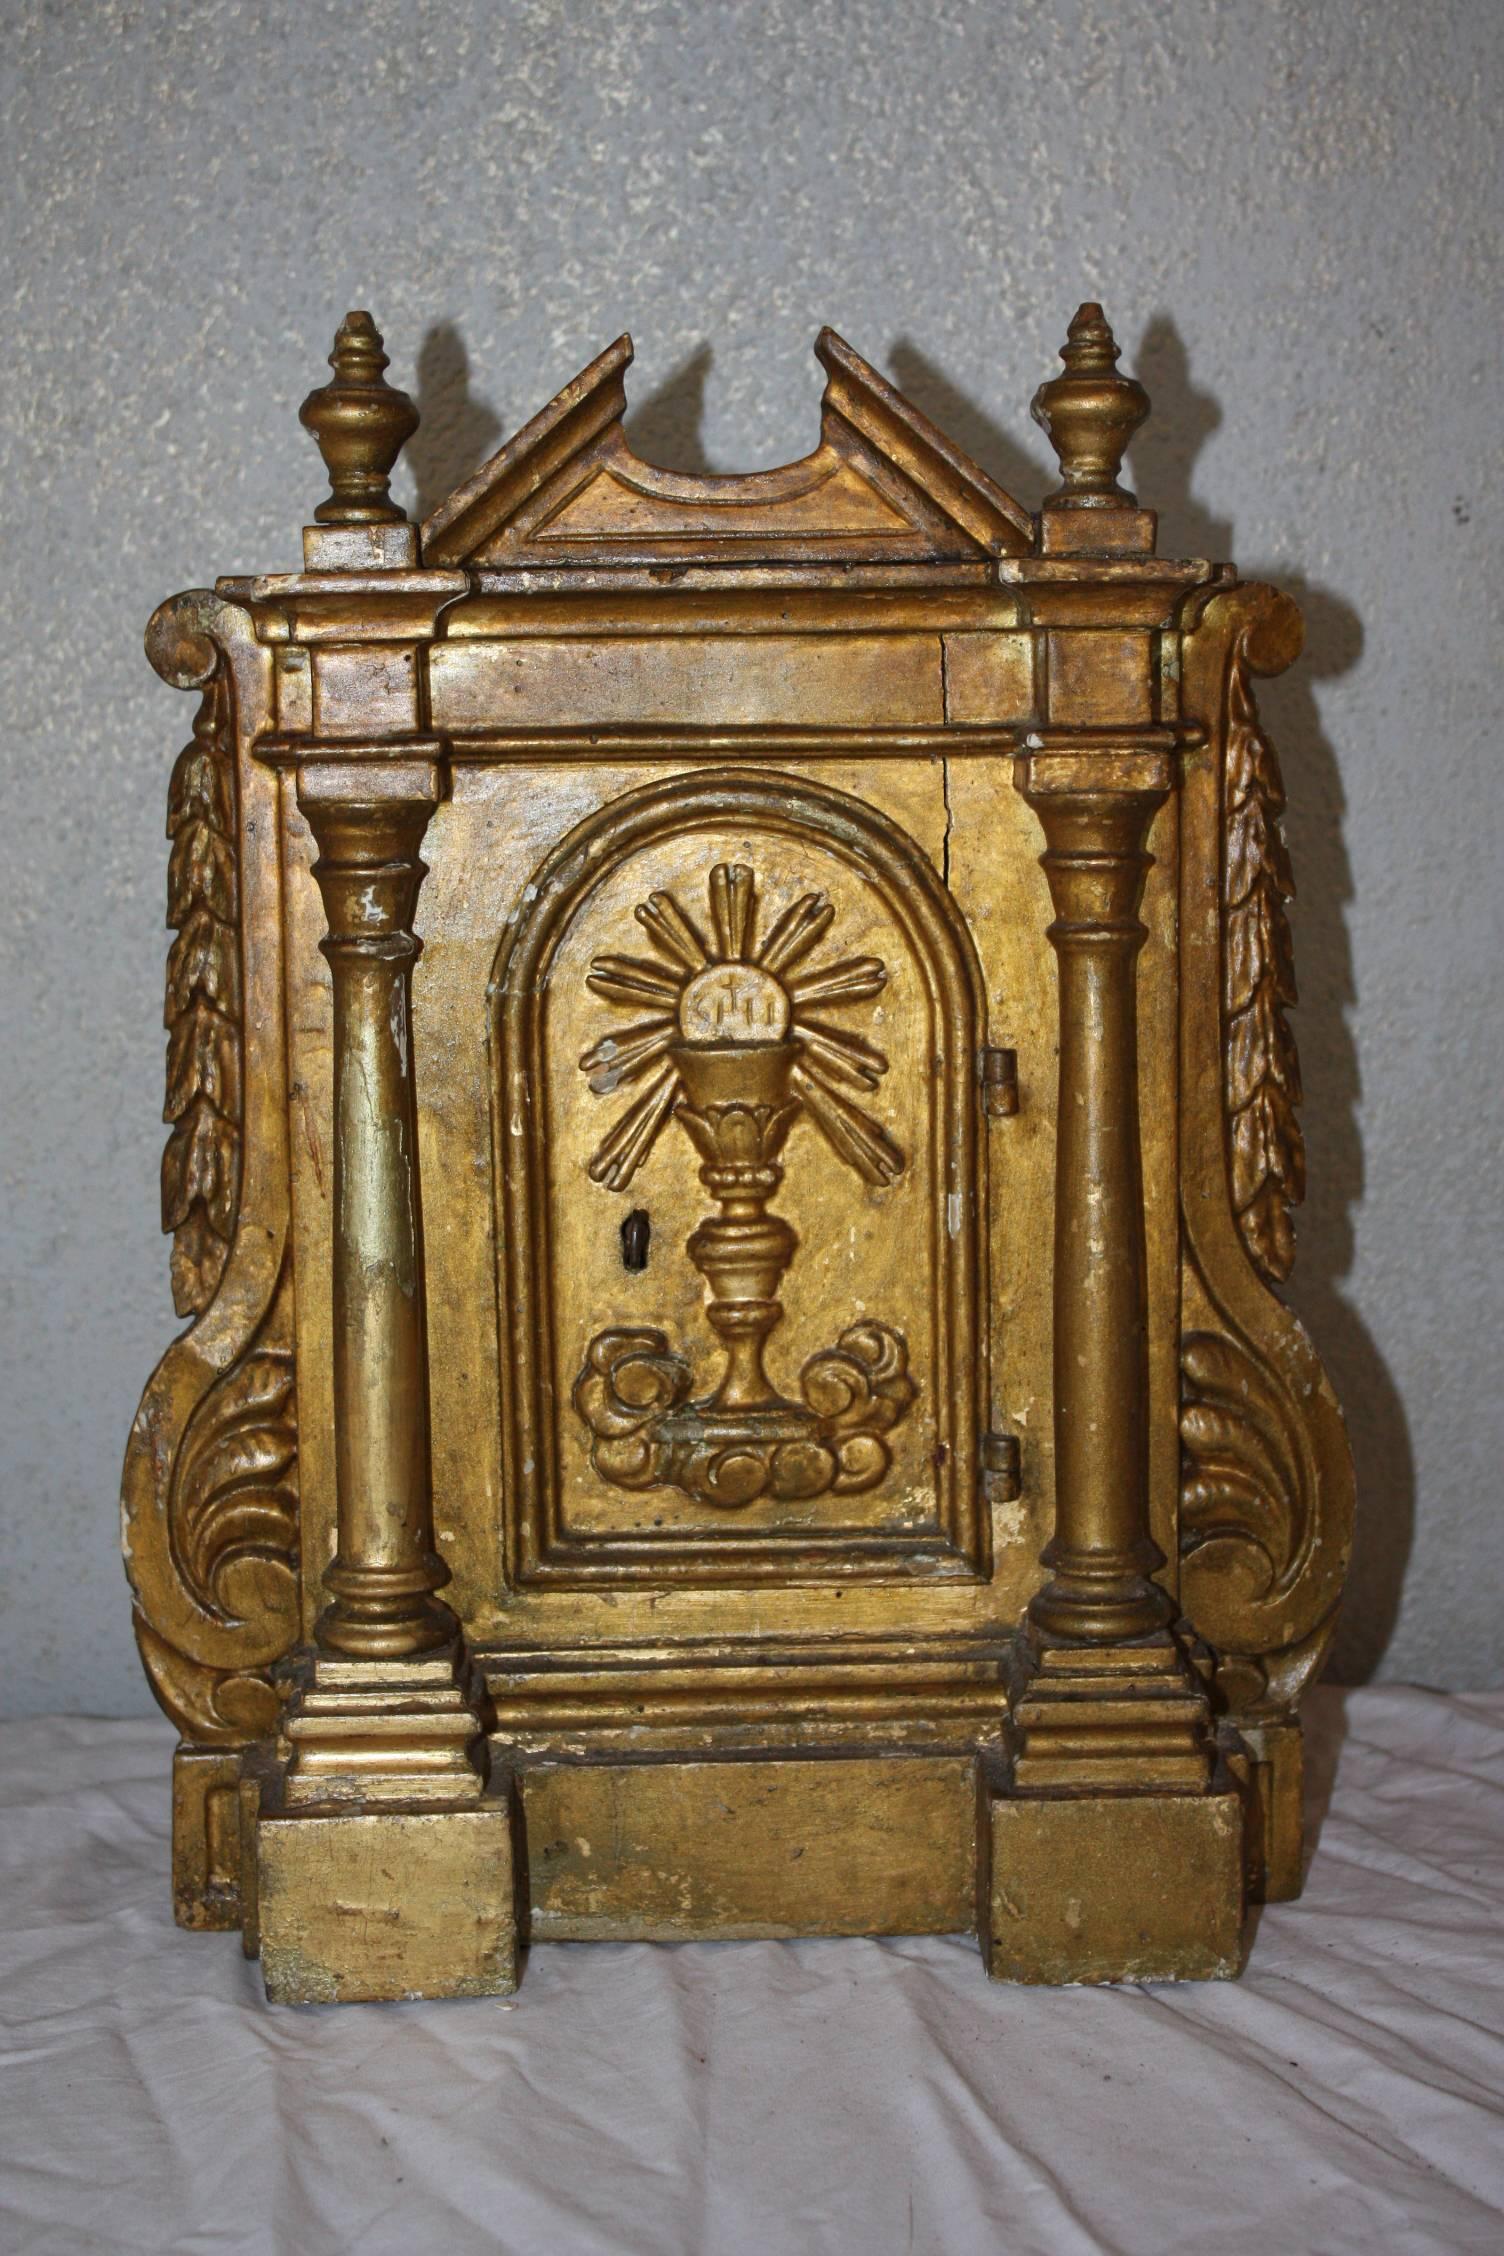 This is a very attractive small French tabernacle that dates to the 19th Century.  The carvings are very nice.  There is a key but the lock no longer works.  